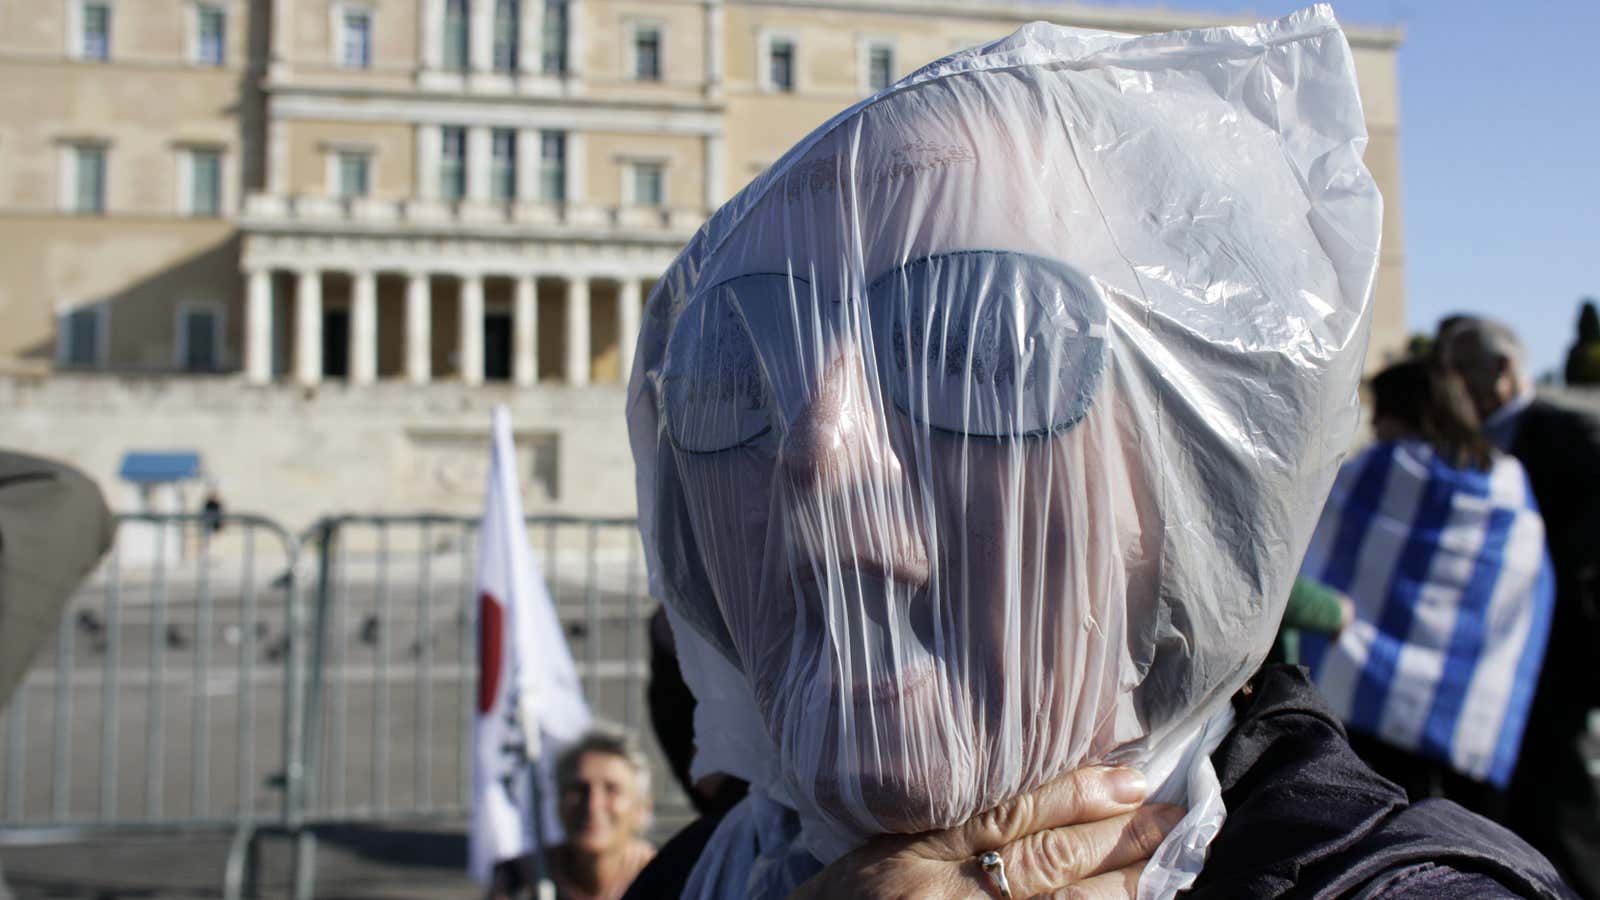 A Greek woman protests austerity measures earlier this month. Despite today’s deal, Greece is left holding the bag on a huge debt burden.